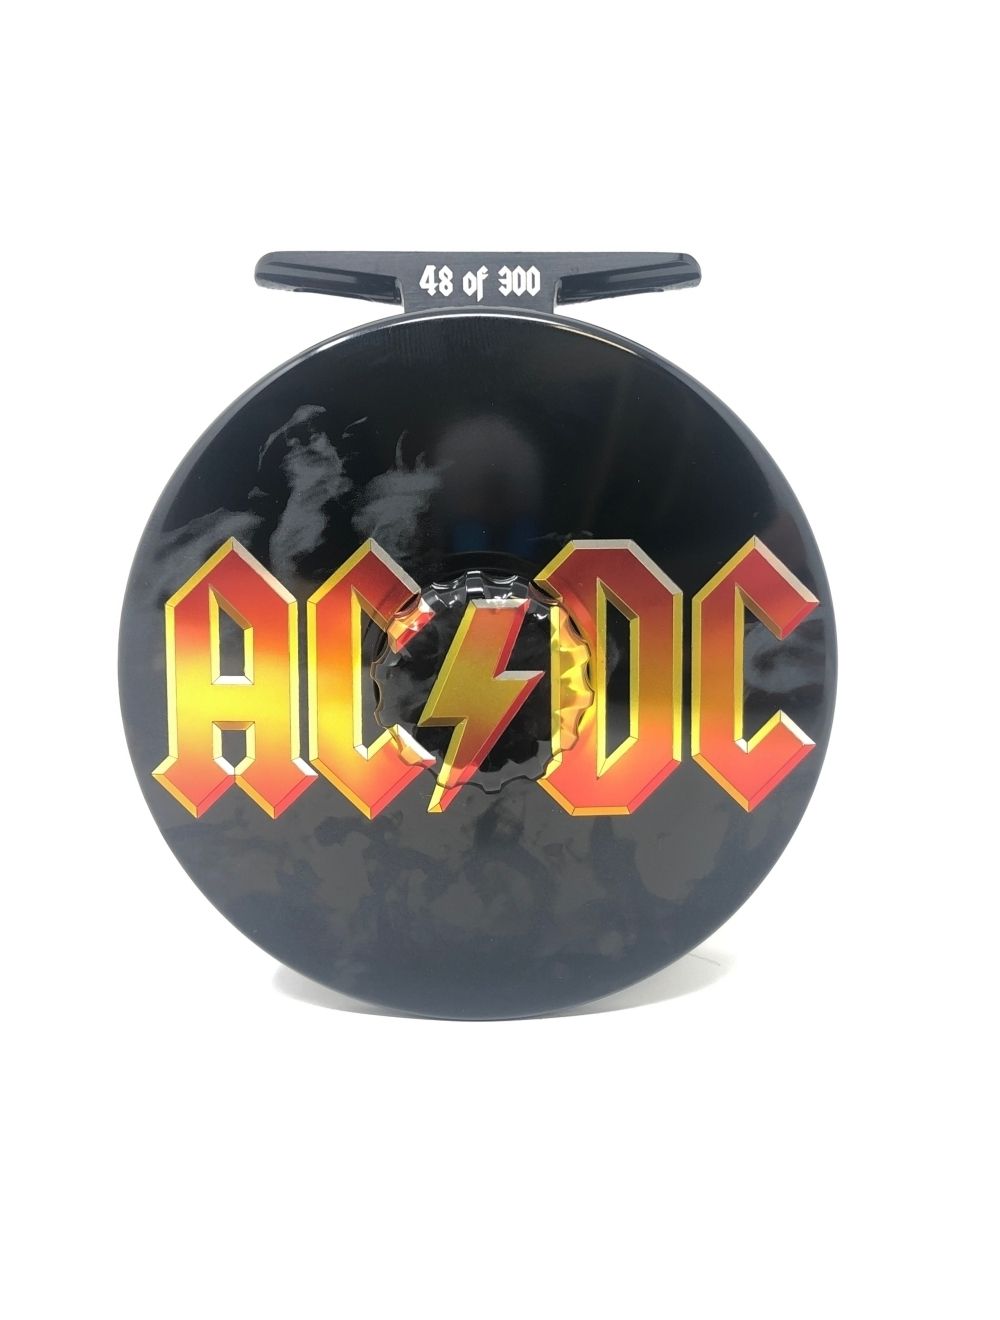 Super Series 7/8 Reel AC/DC Limited Edition